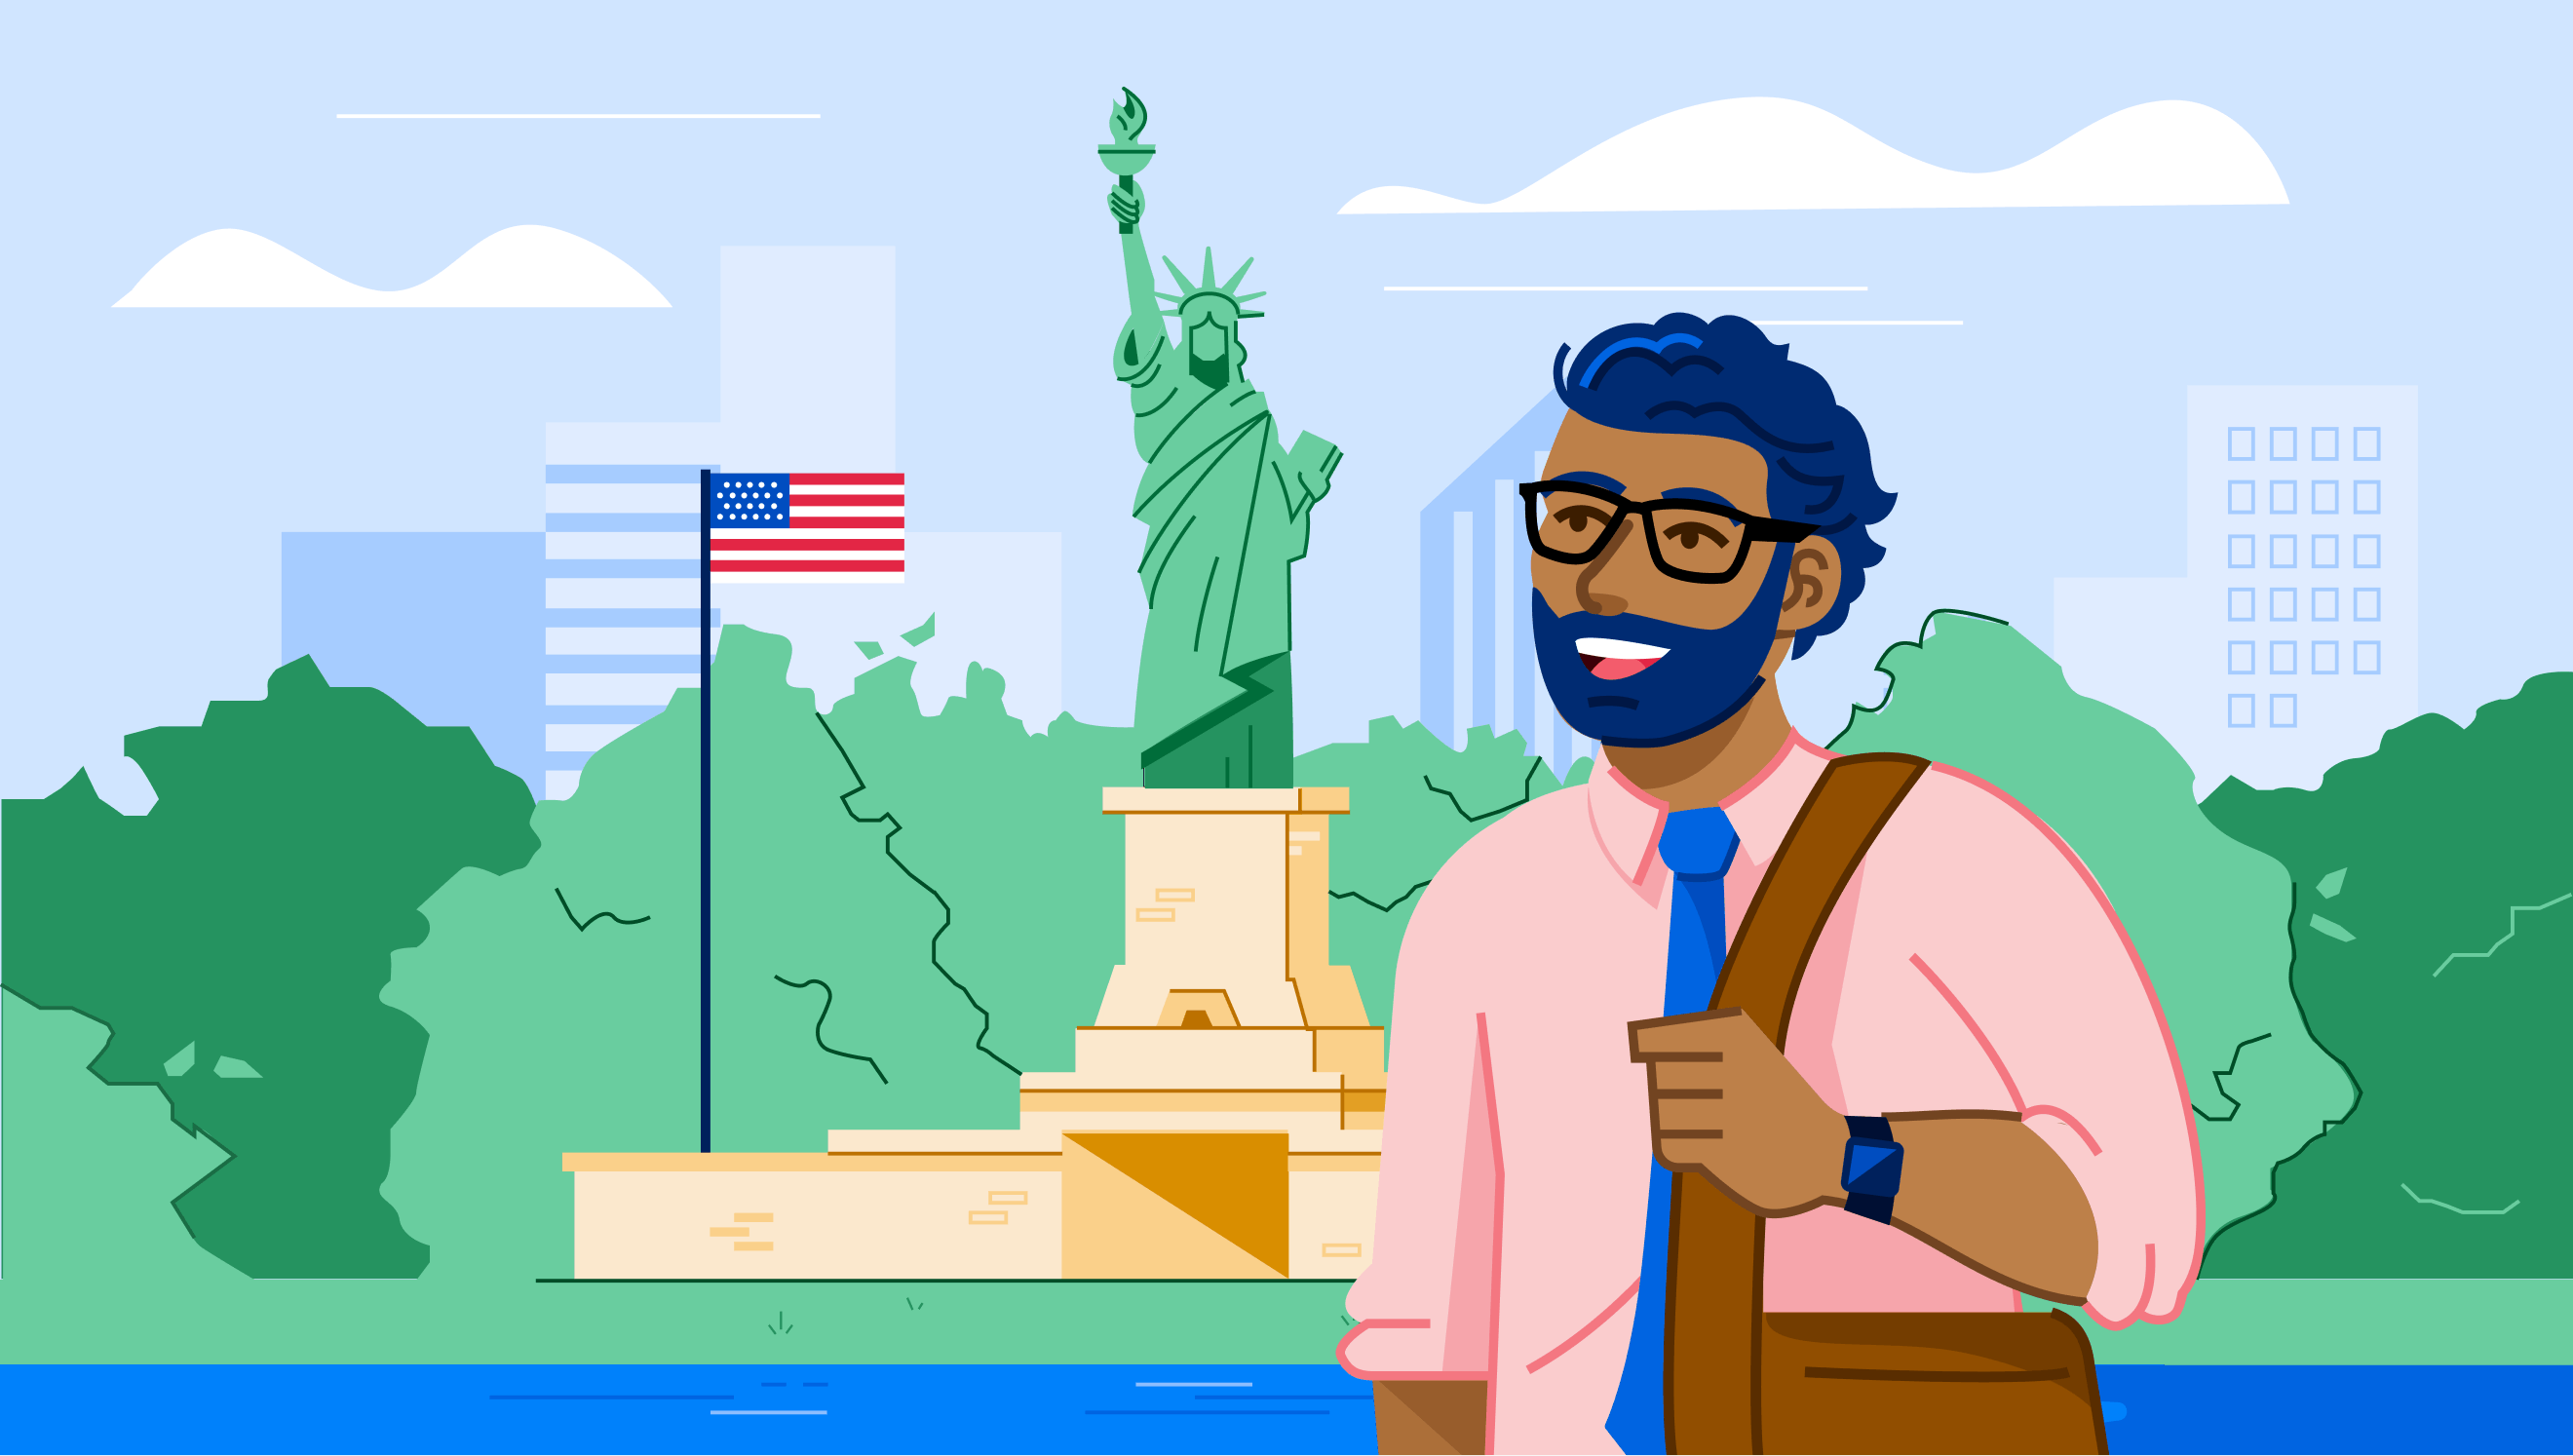 Illustration of man standing in front of Statue of Liberty